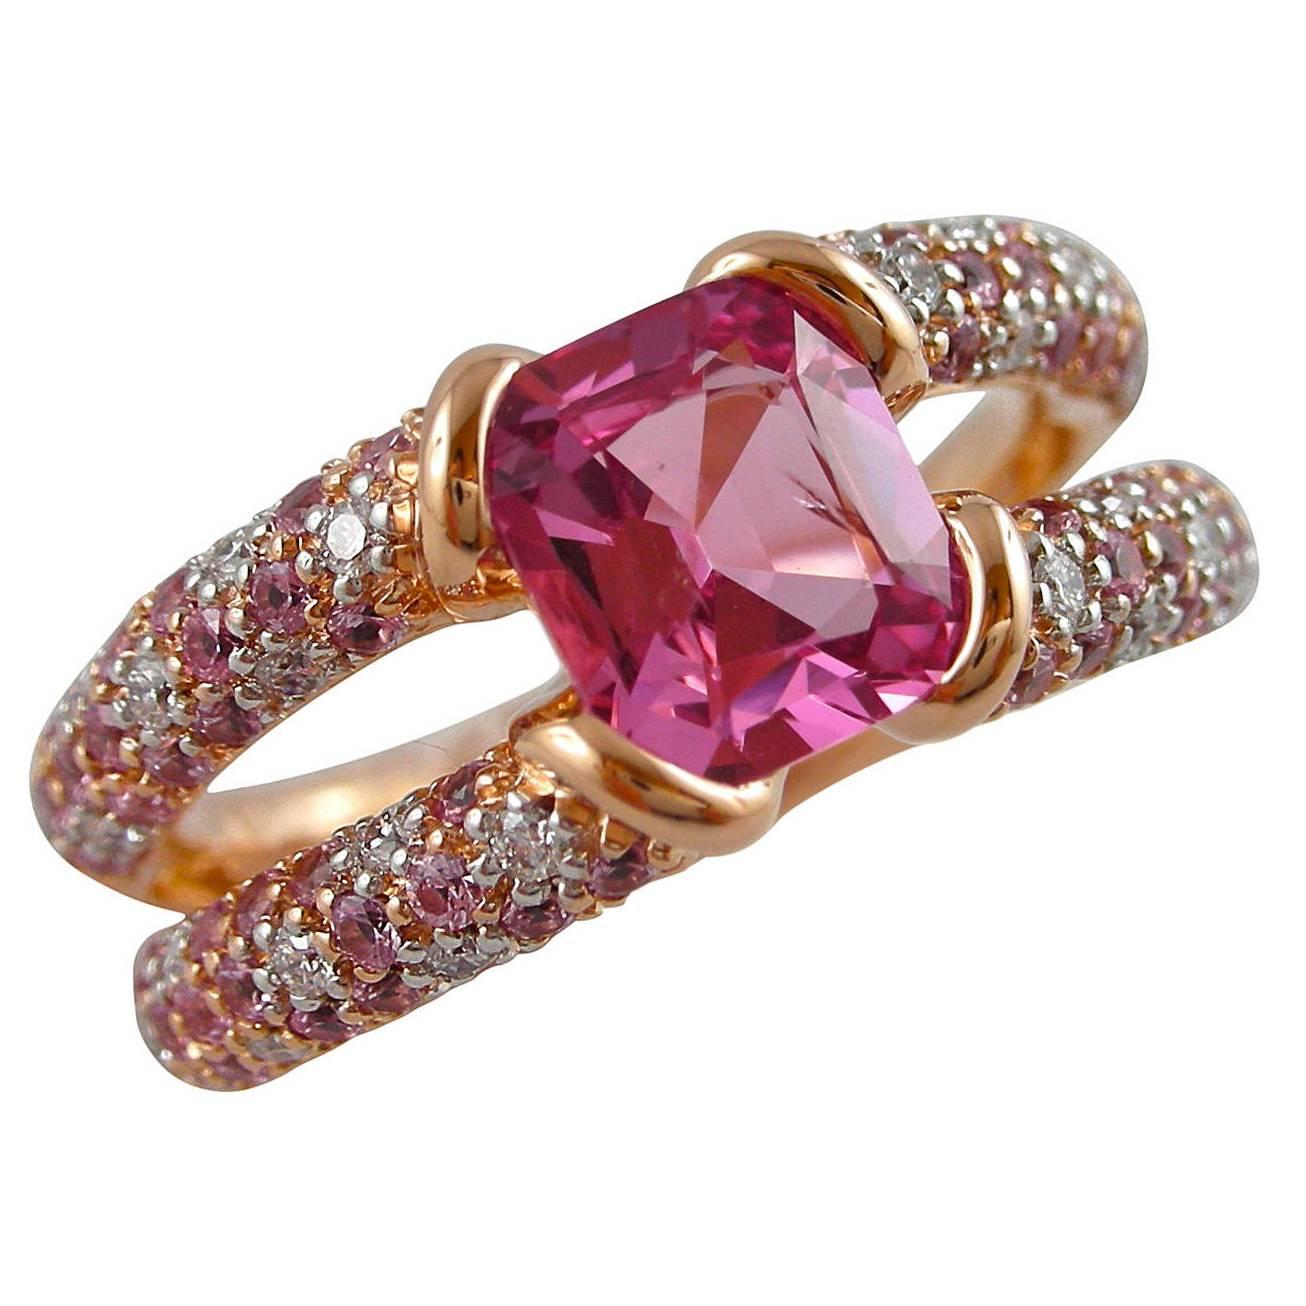 Alex Jona design collection, designed and hand crafted in Italy, 18 Karat rose gold ring, set with one Pink Spinel weighing 1,41carats. On either side of the vivid center stone a split shank set with brilliant-cut round white diamonds weighing 0.22